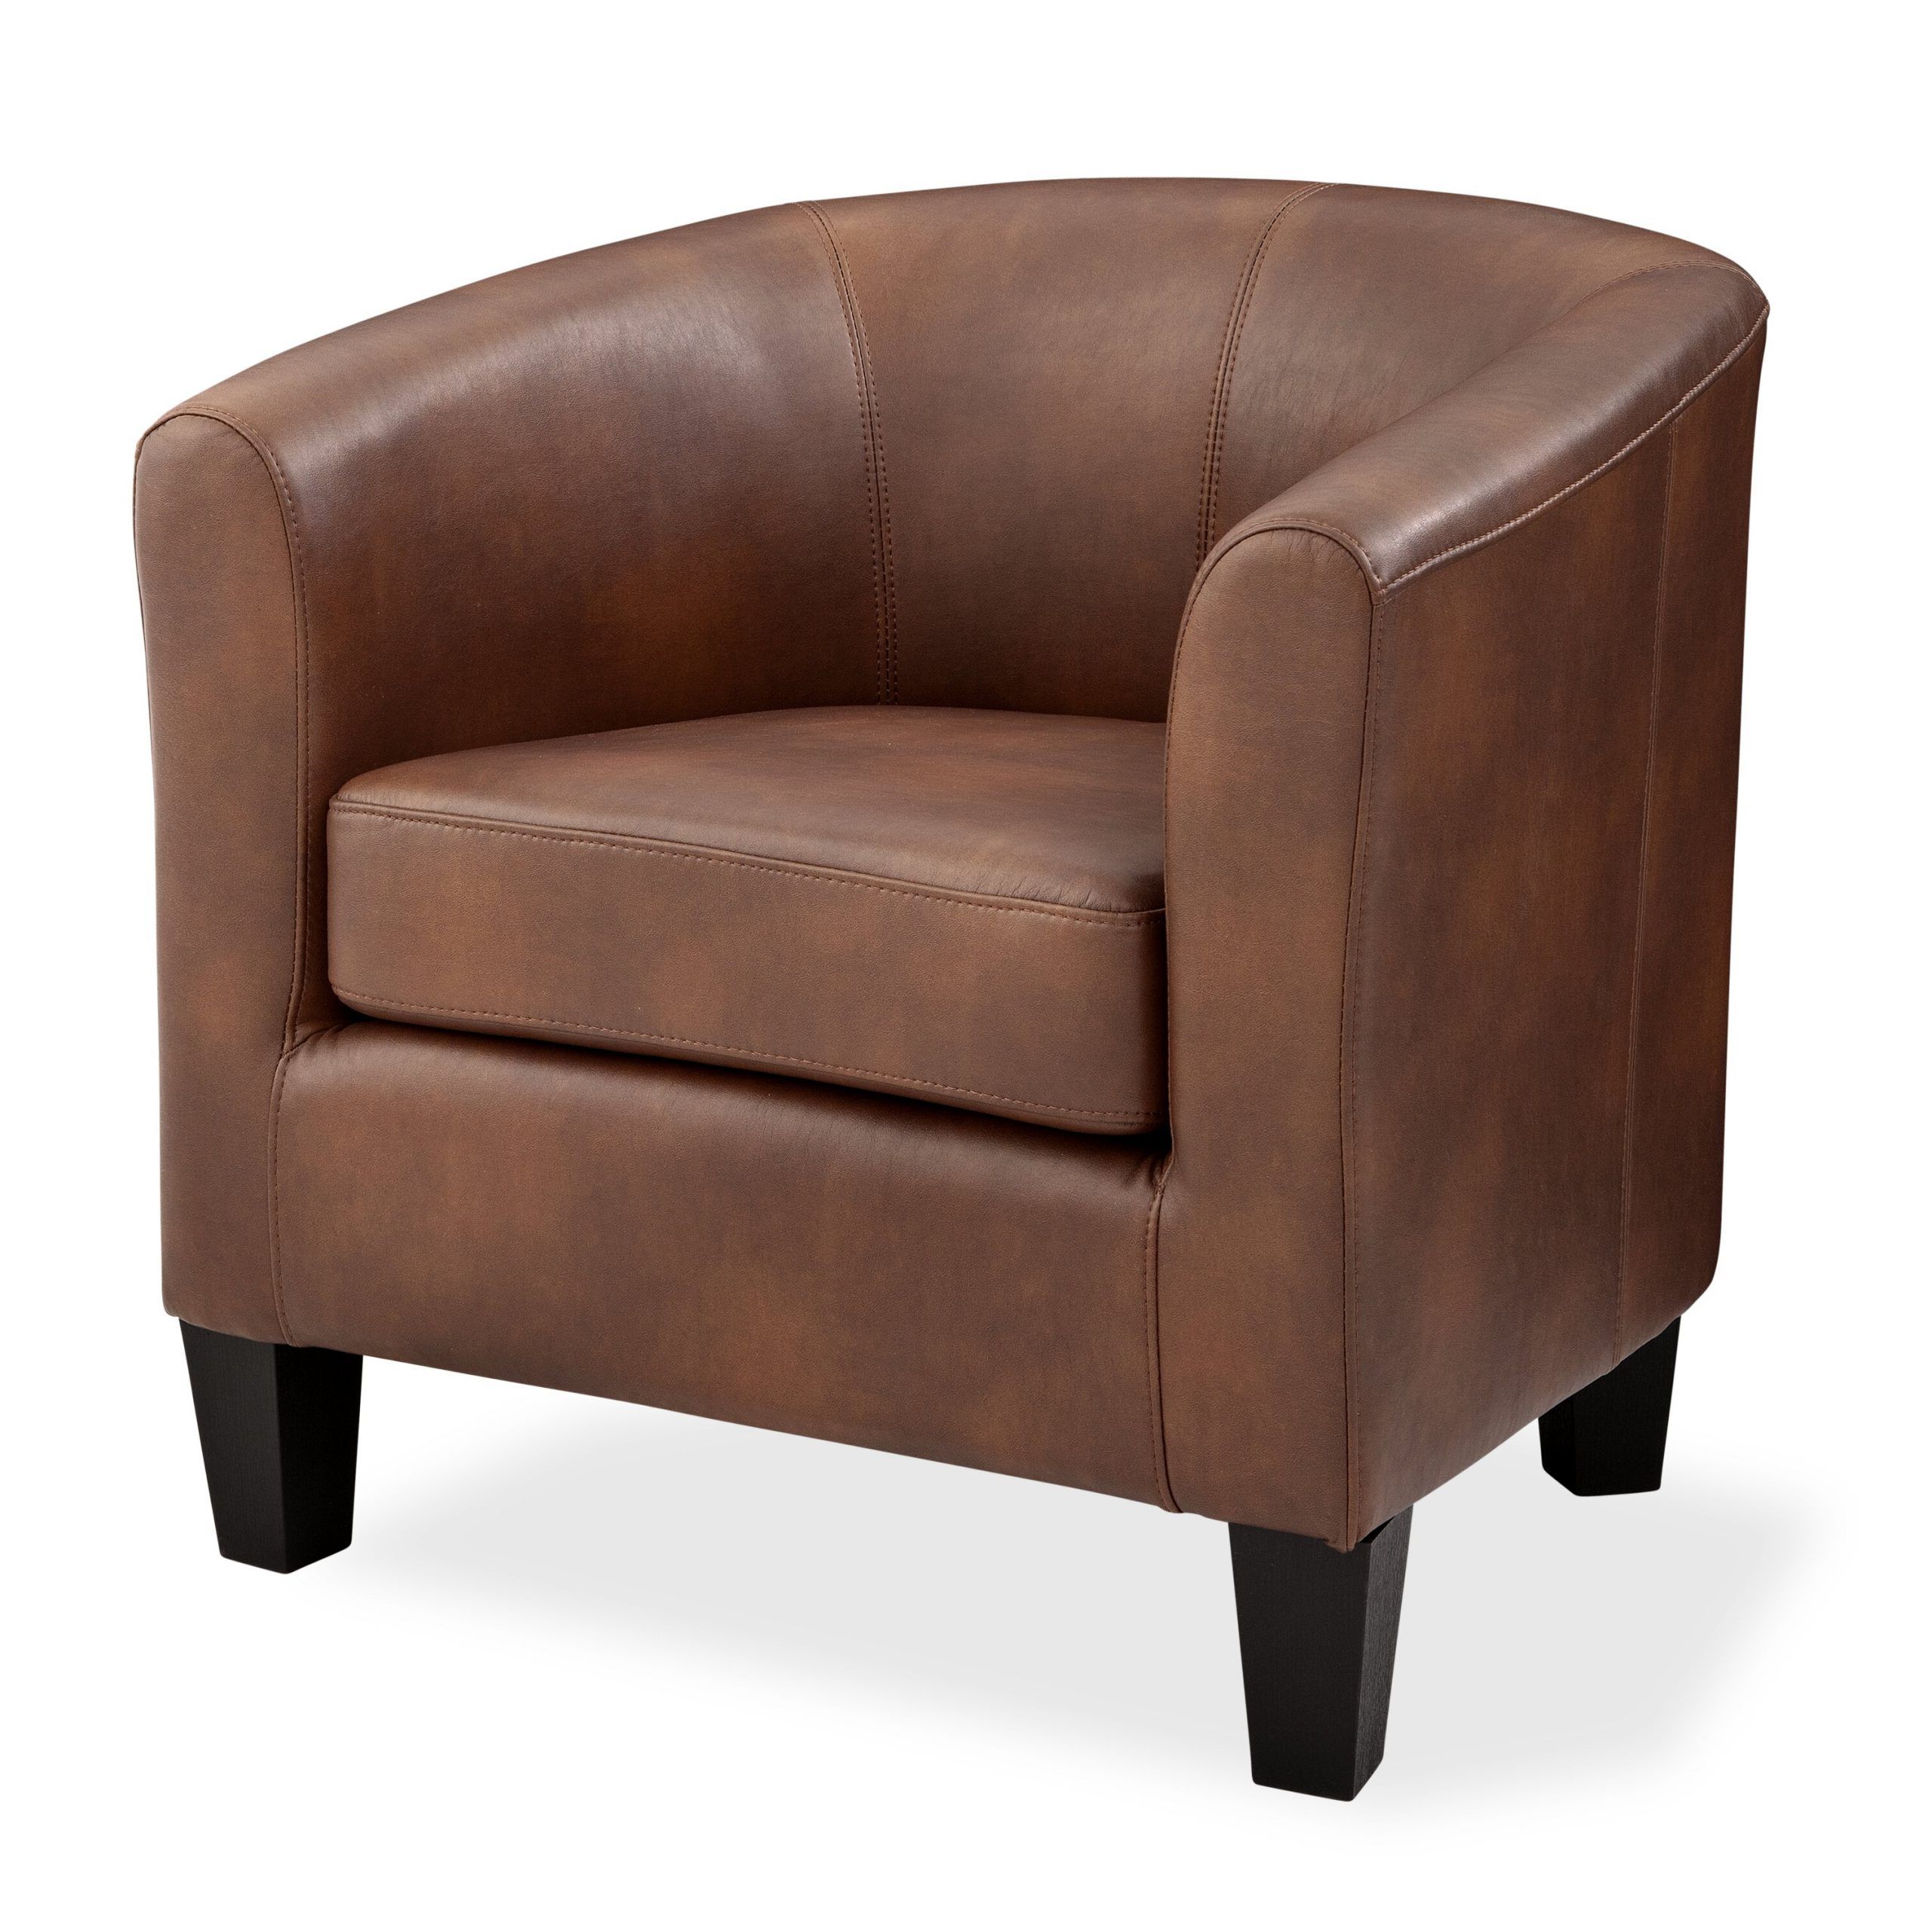 Filton Barrel Chairs With Most Current Colden 30" W Faux Leather Barrel Chair (View 8 of 20)